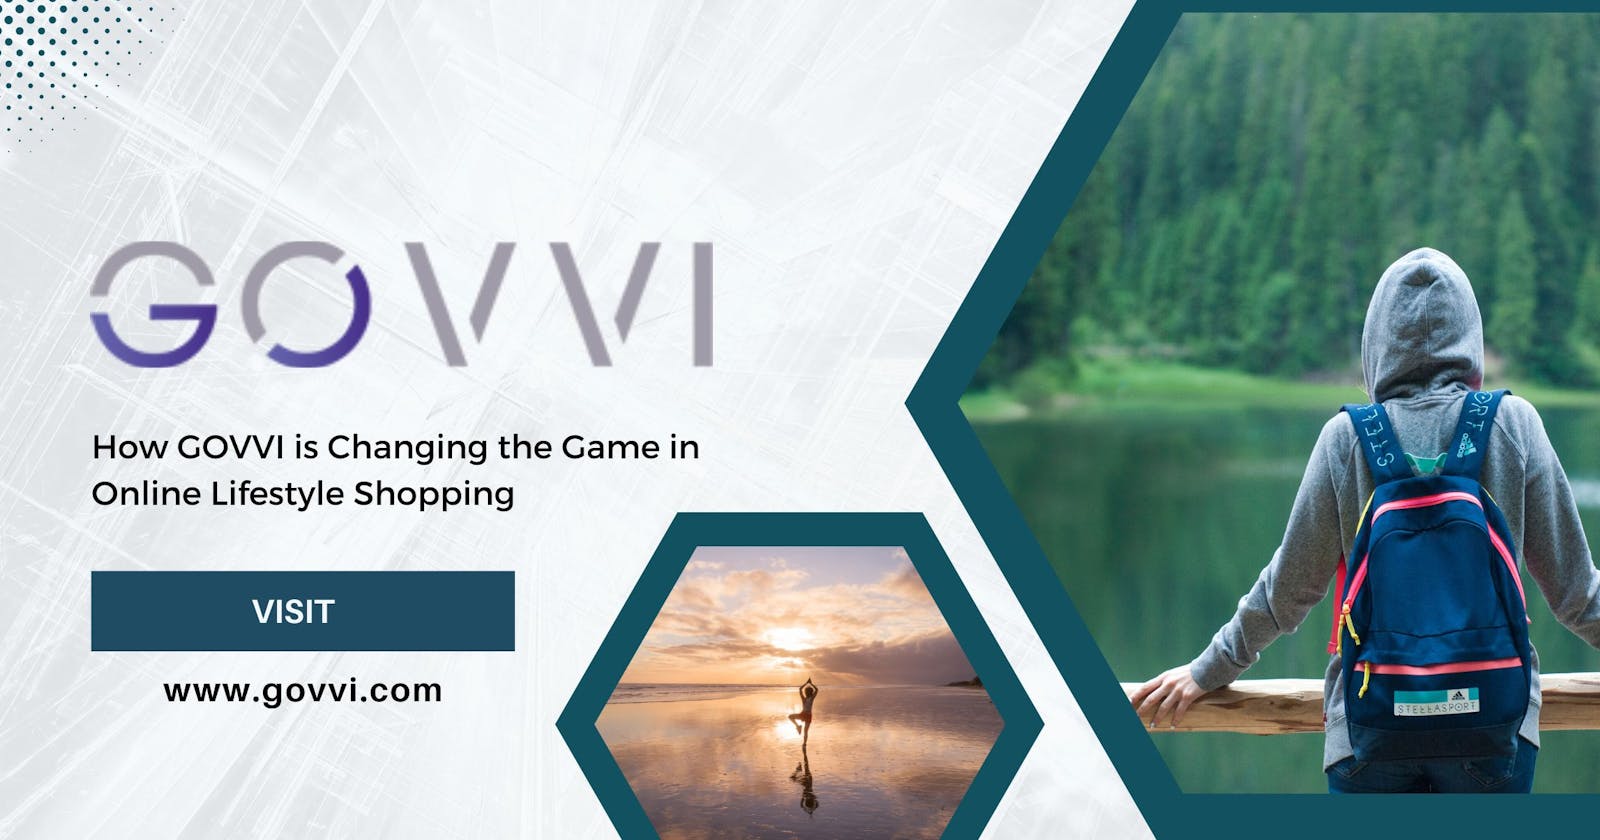 How GOVVI is Changing the Game in Online Lifestyle Shopping